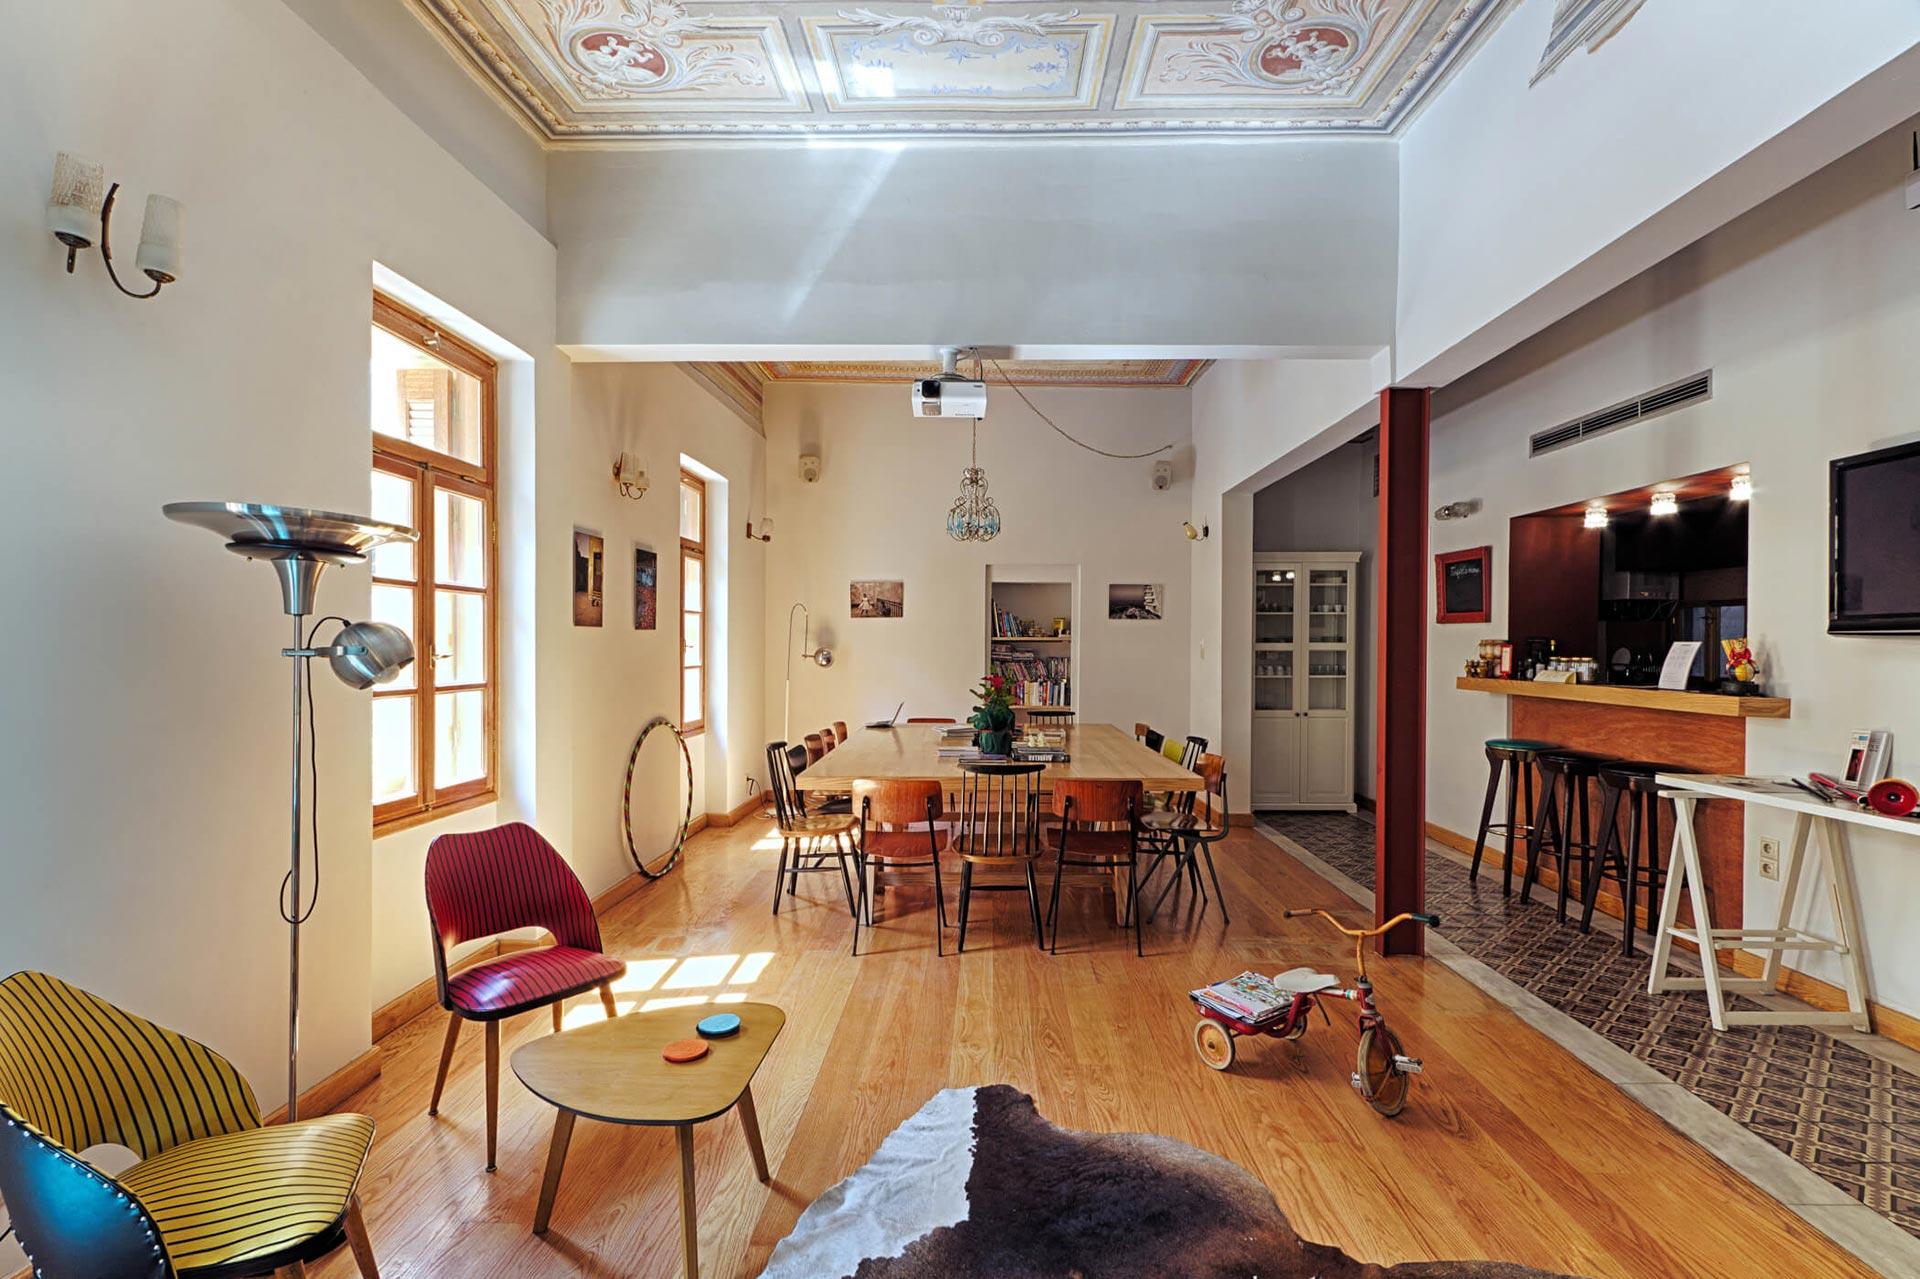 Hostel in Athens